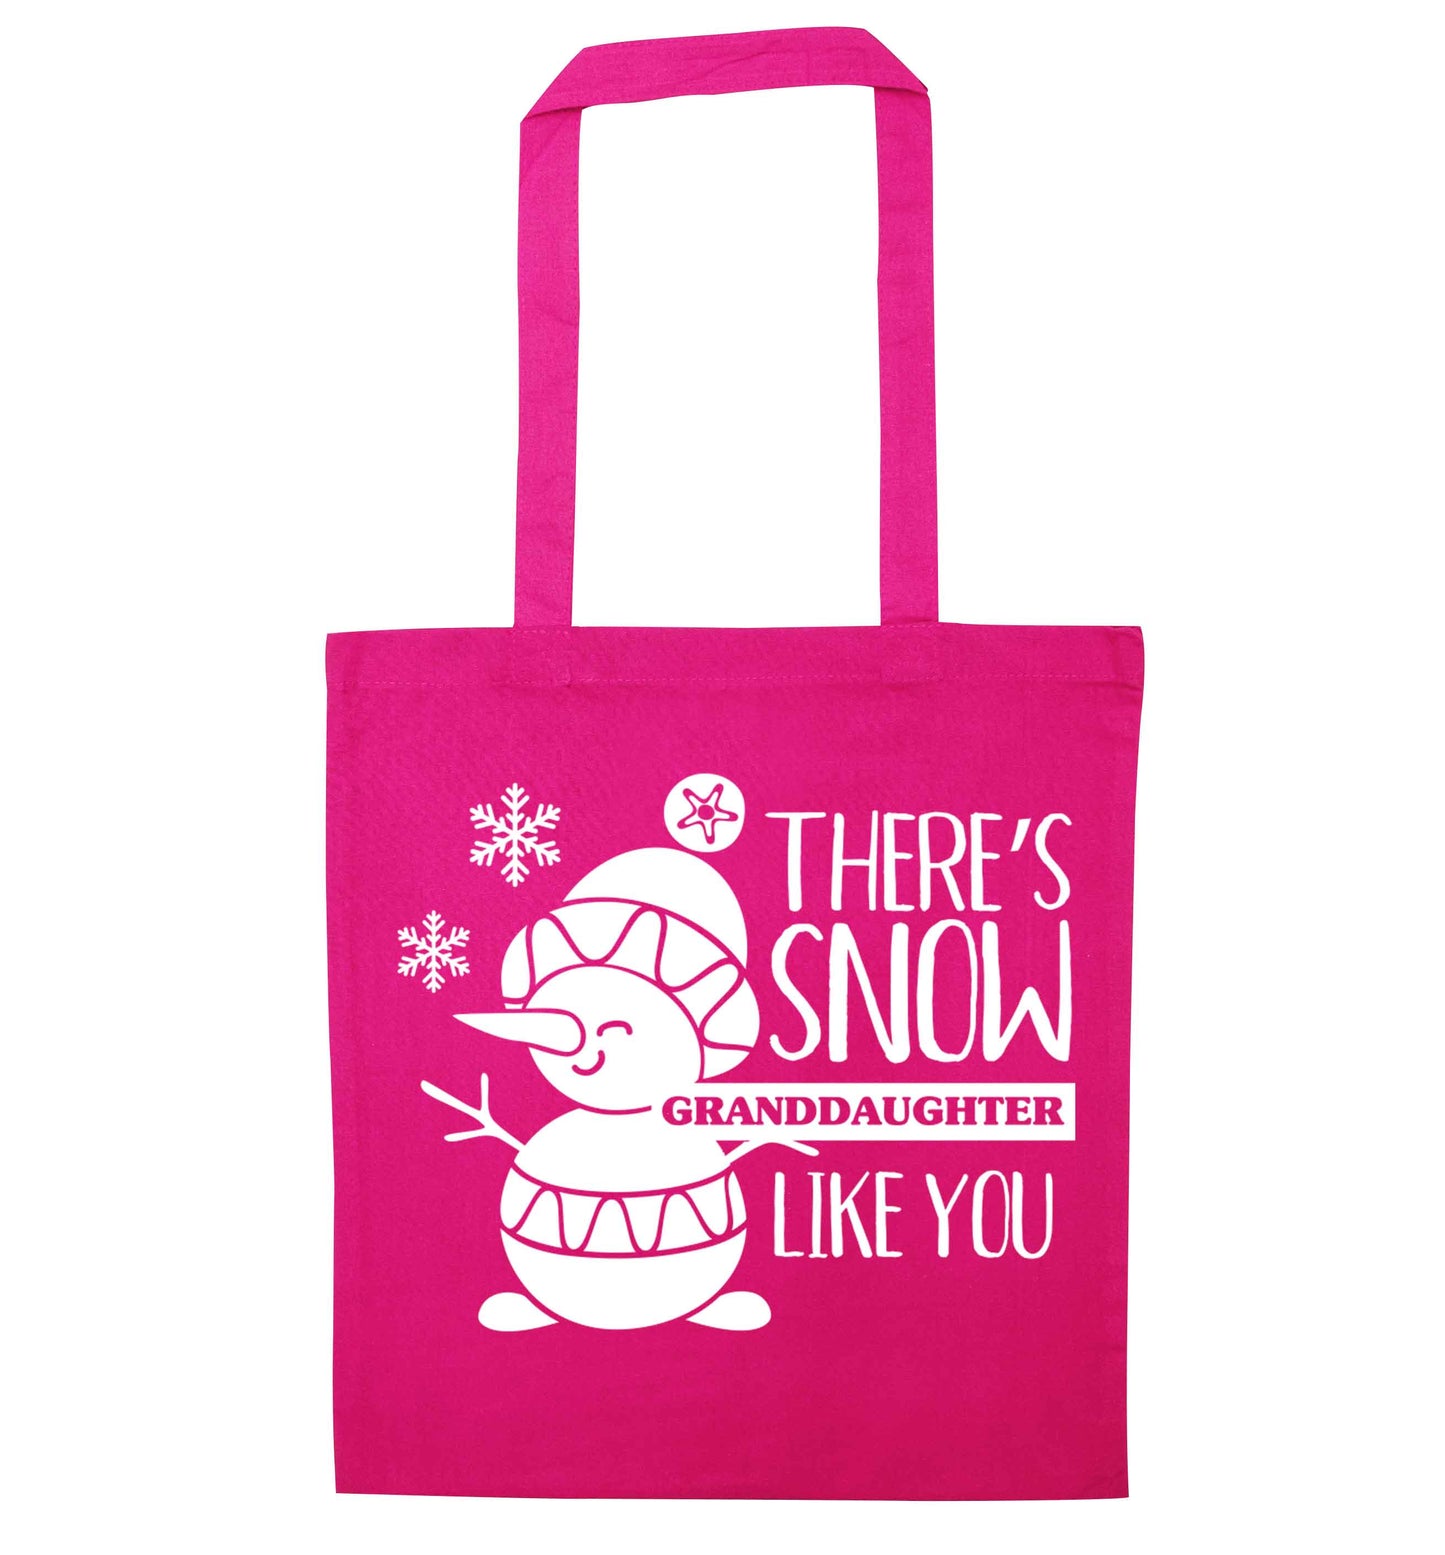 There's snow granddaughter like you pink tote bag